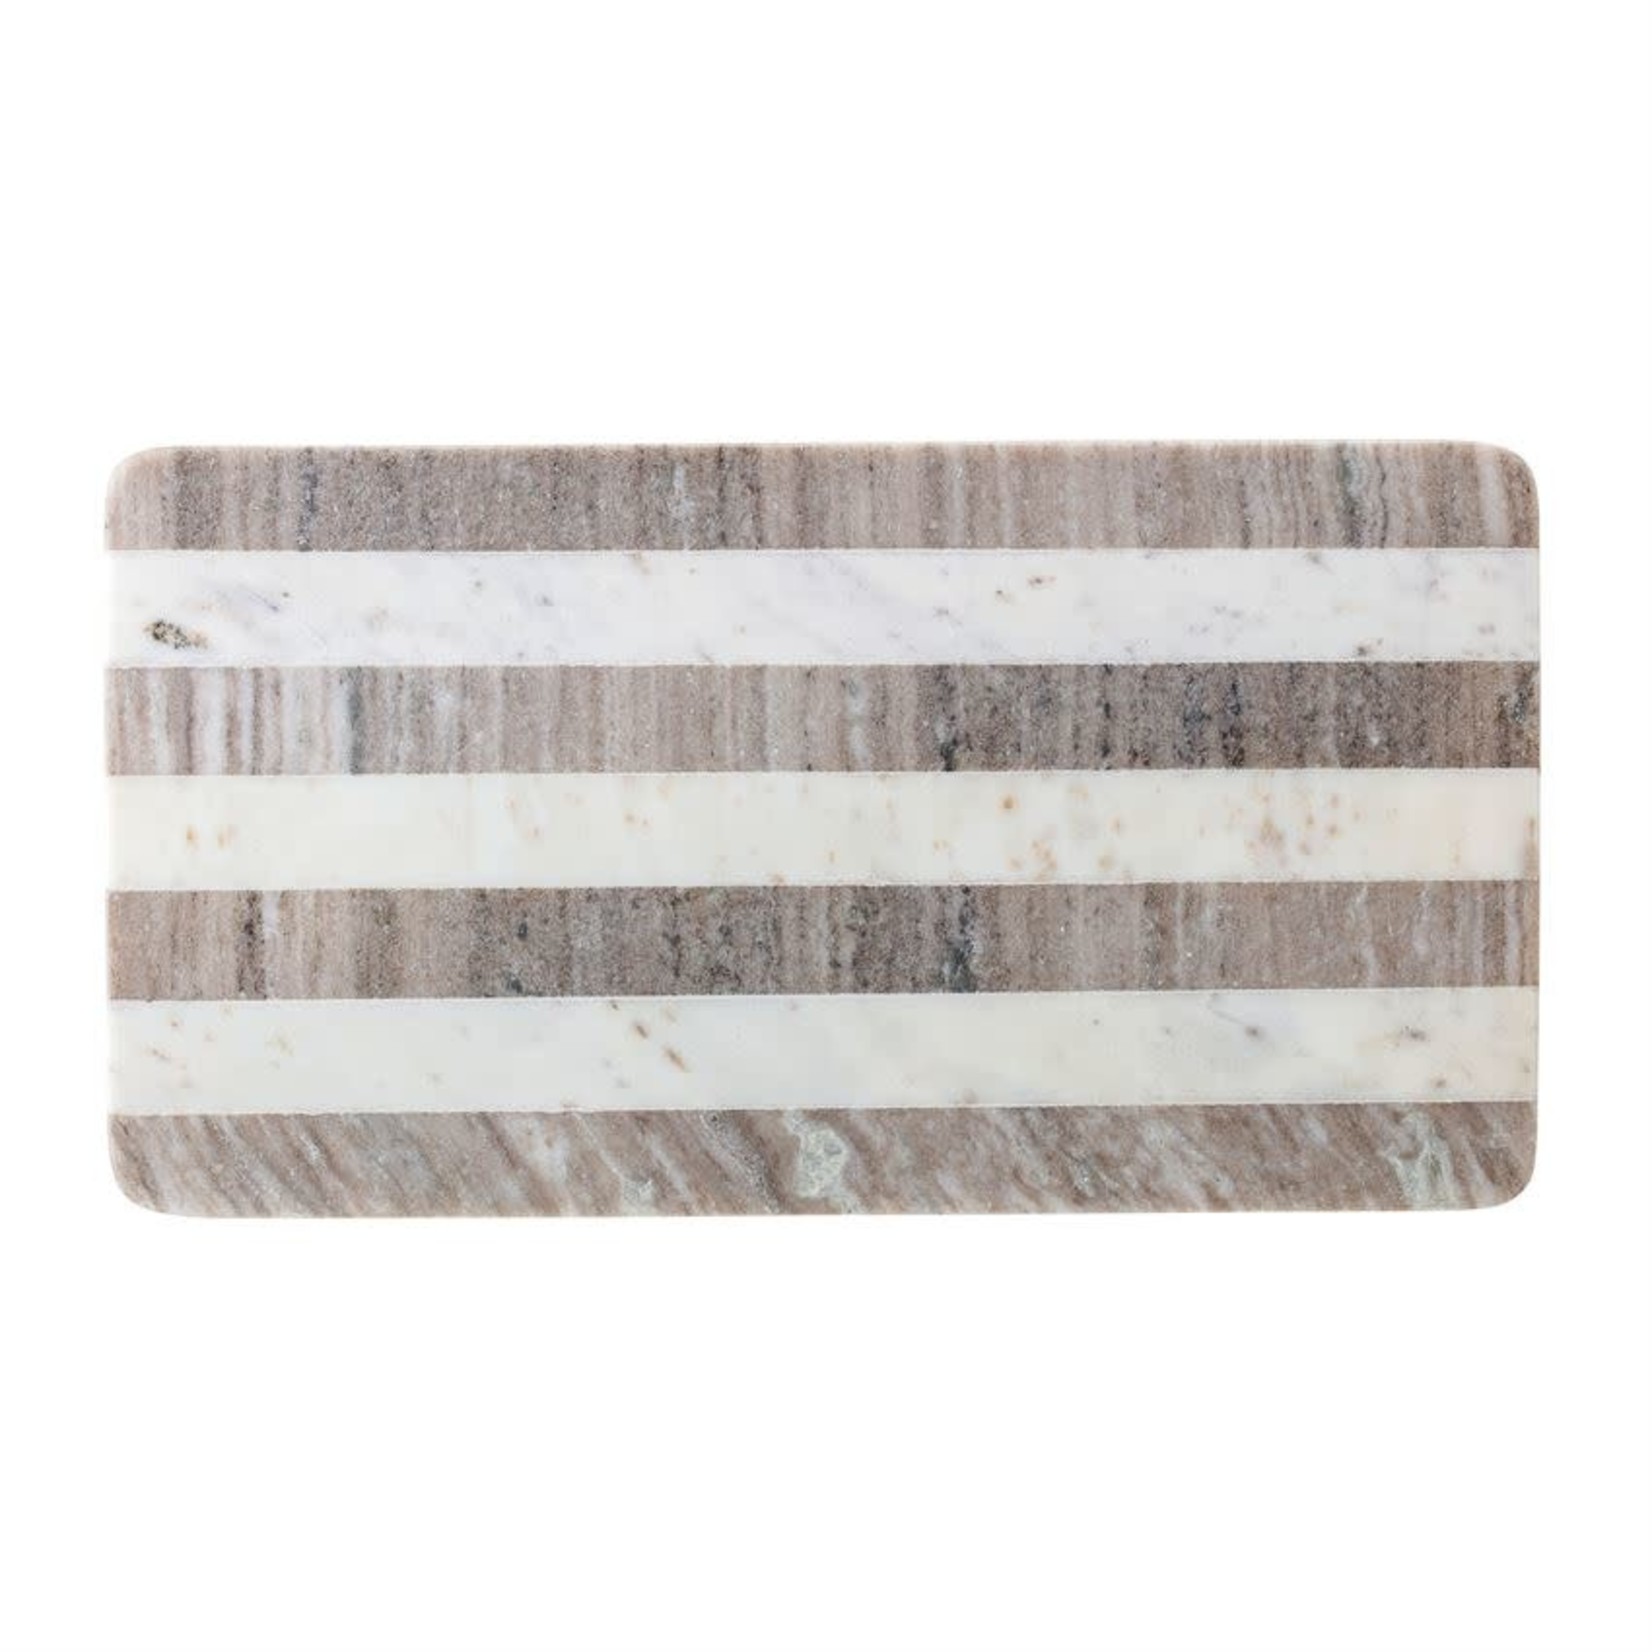 BLOOMINGVILLE MARBLE TRAY CUTTING BOARD